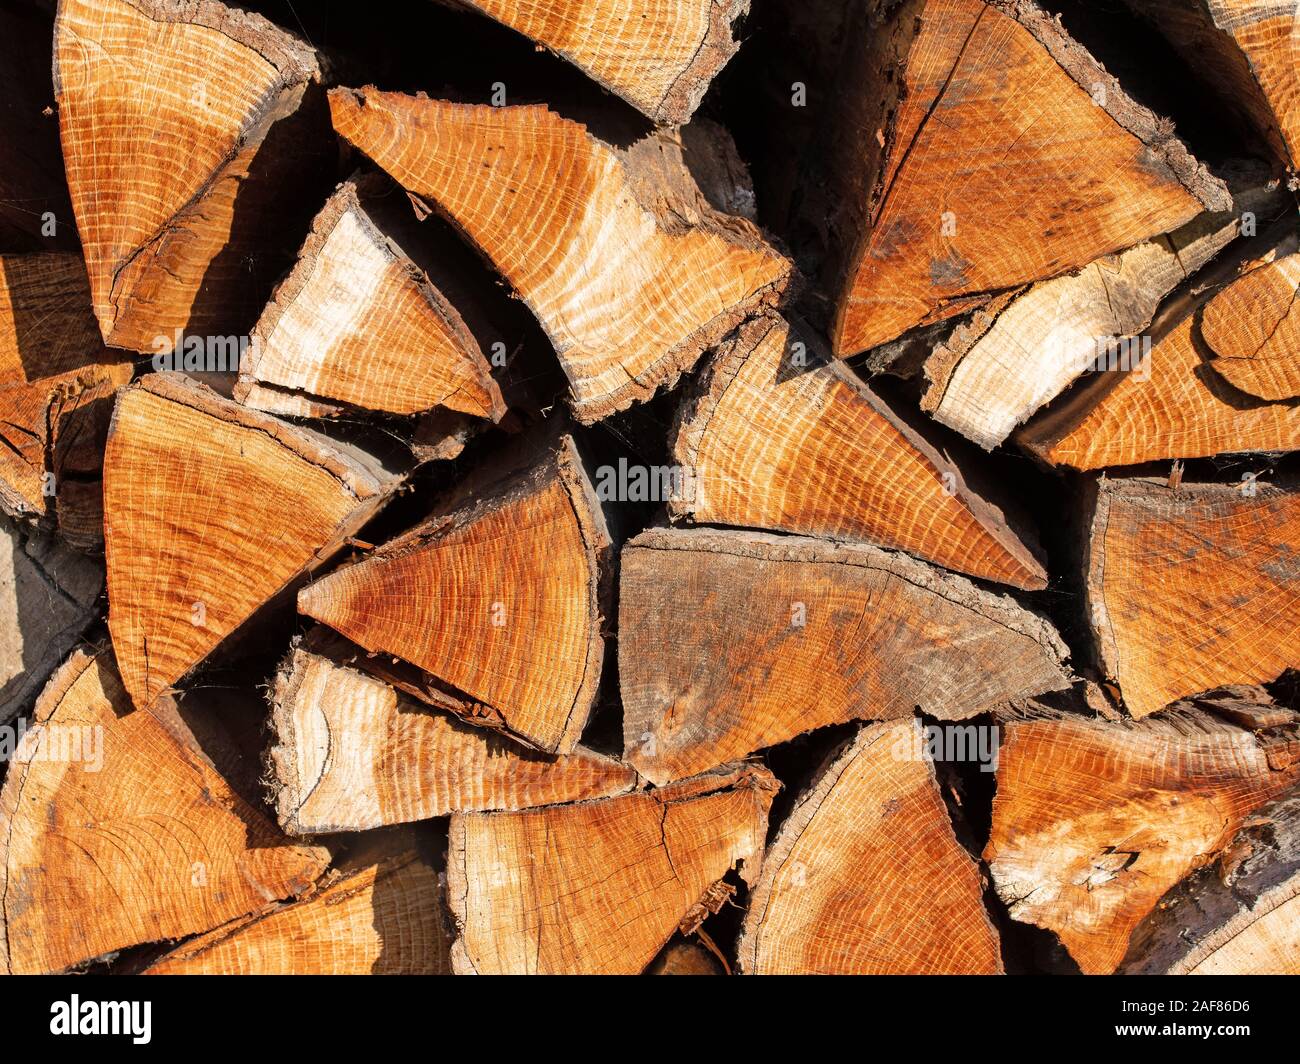 Stacked and chopped firewood to dry Stock Photo